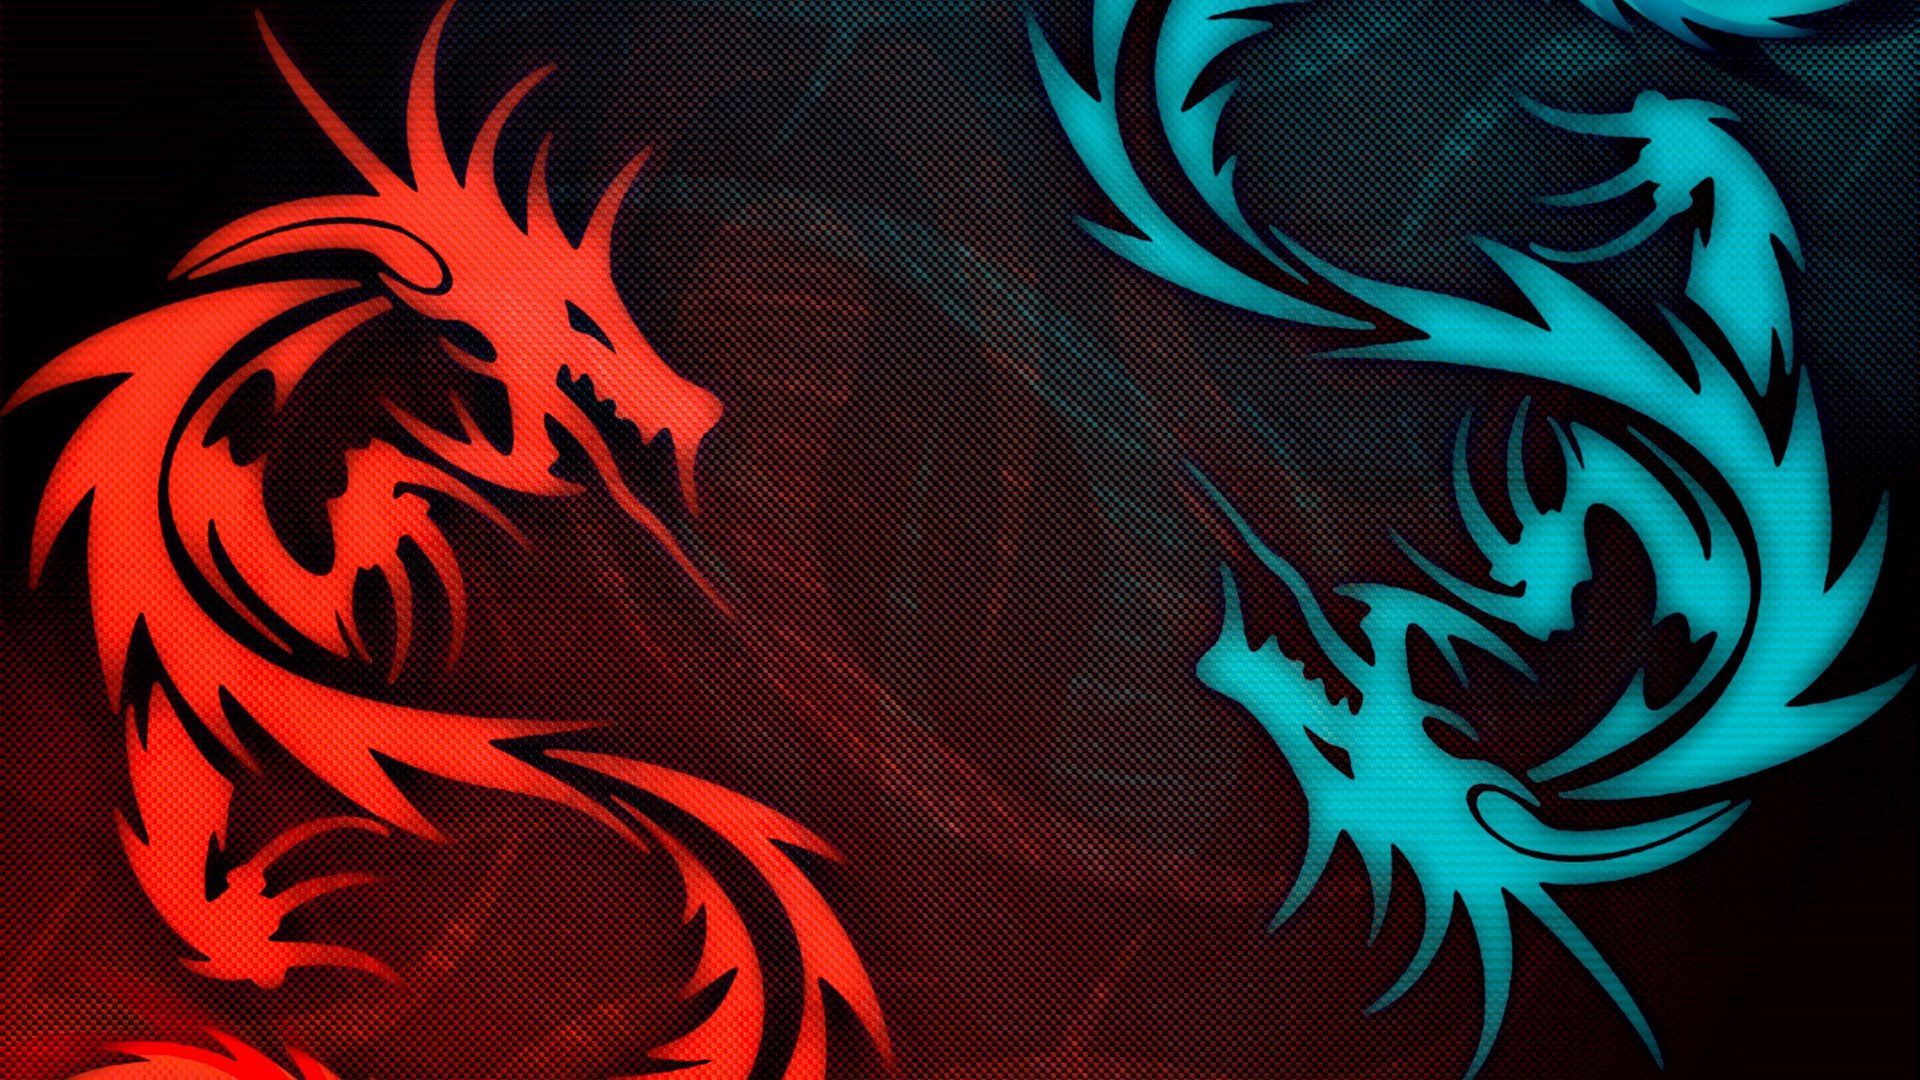 Water And Fire Dragons Wallpaper